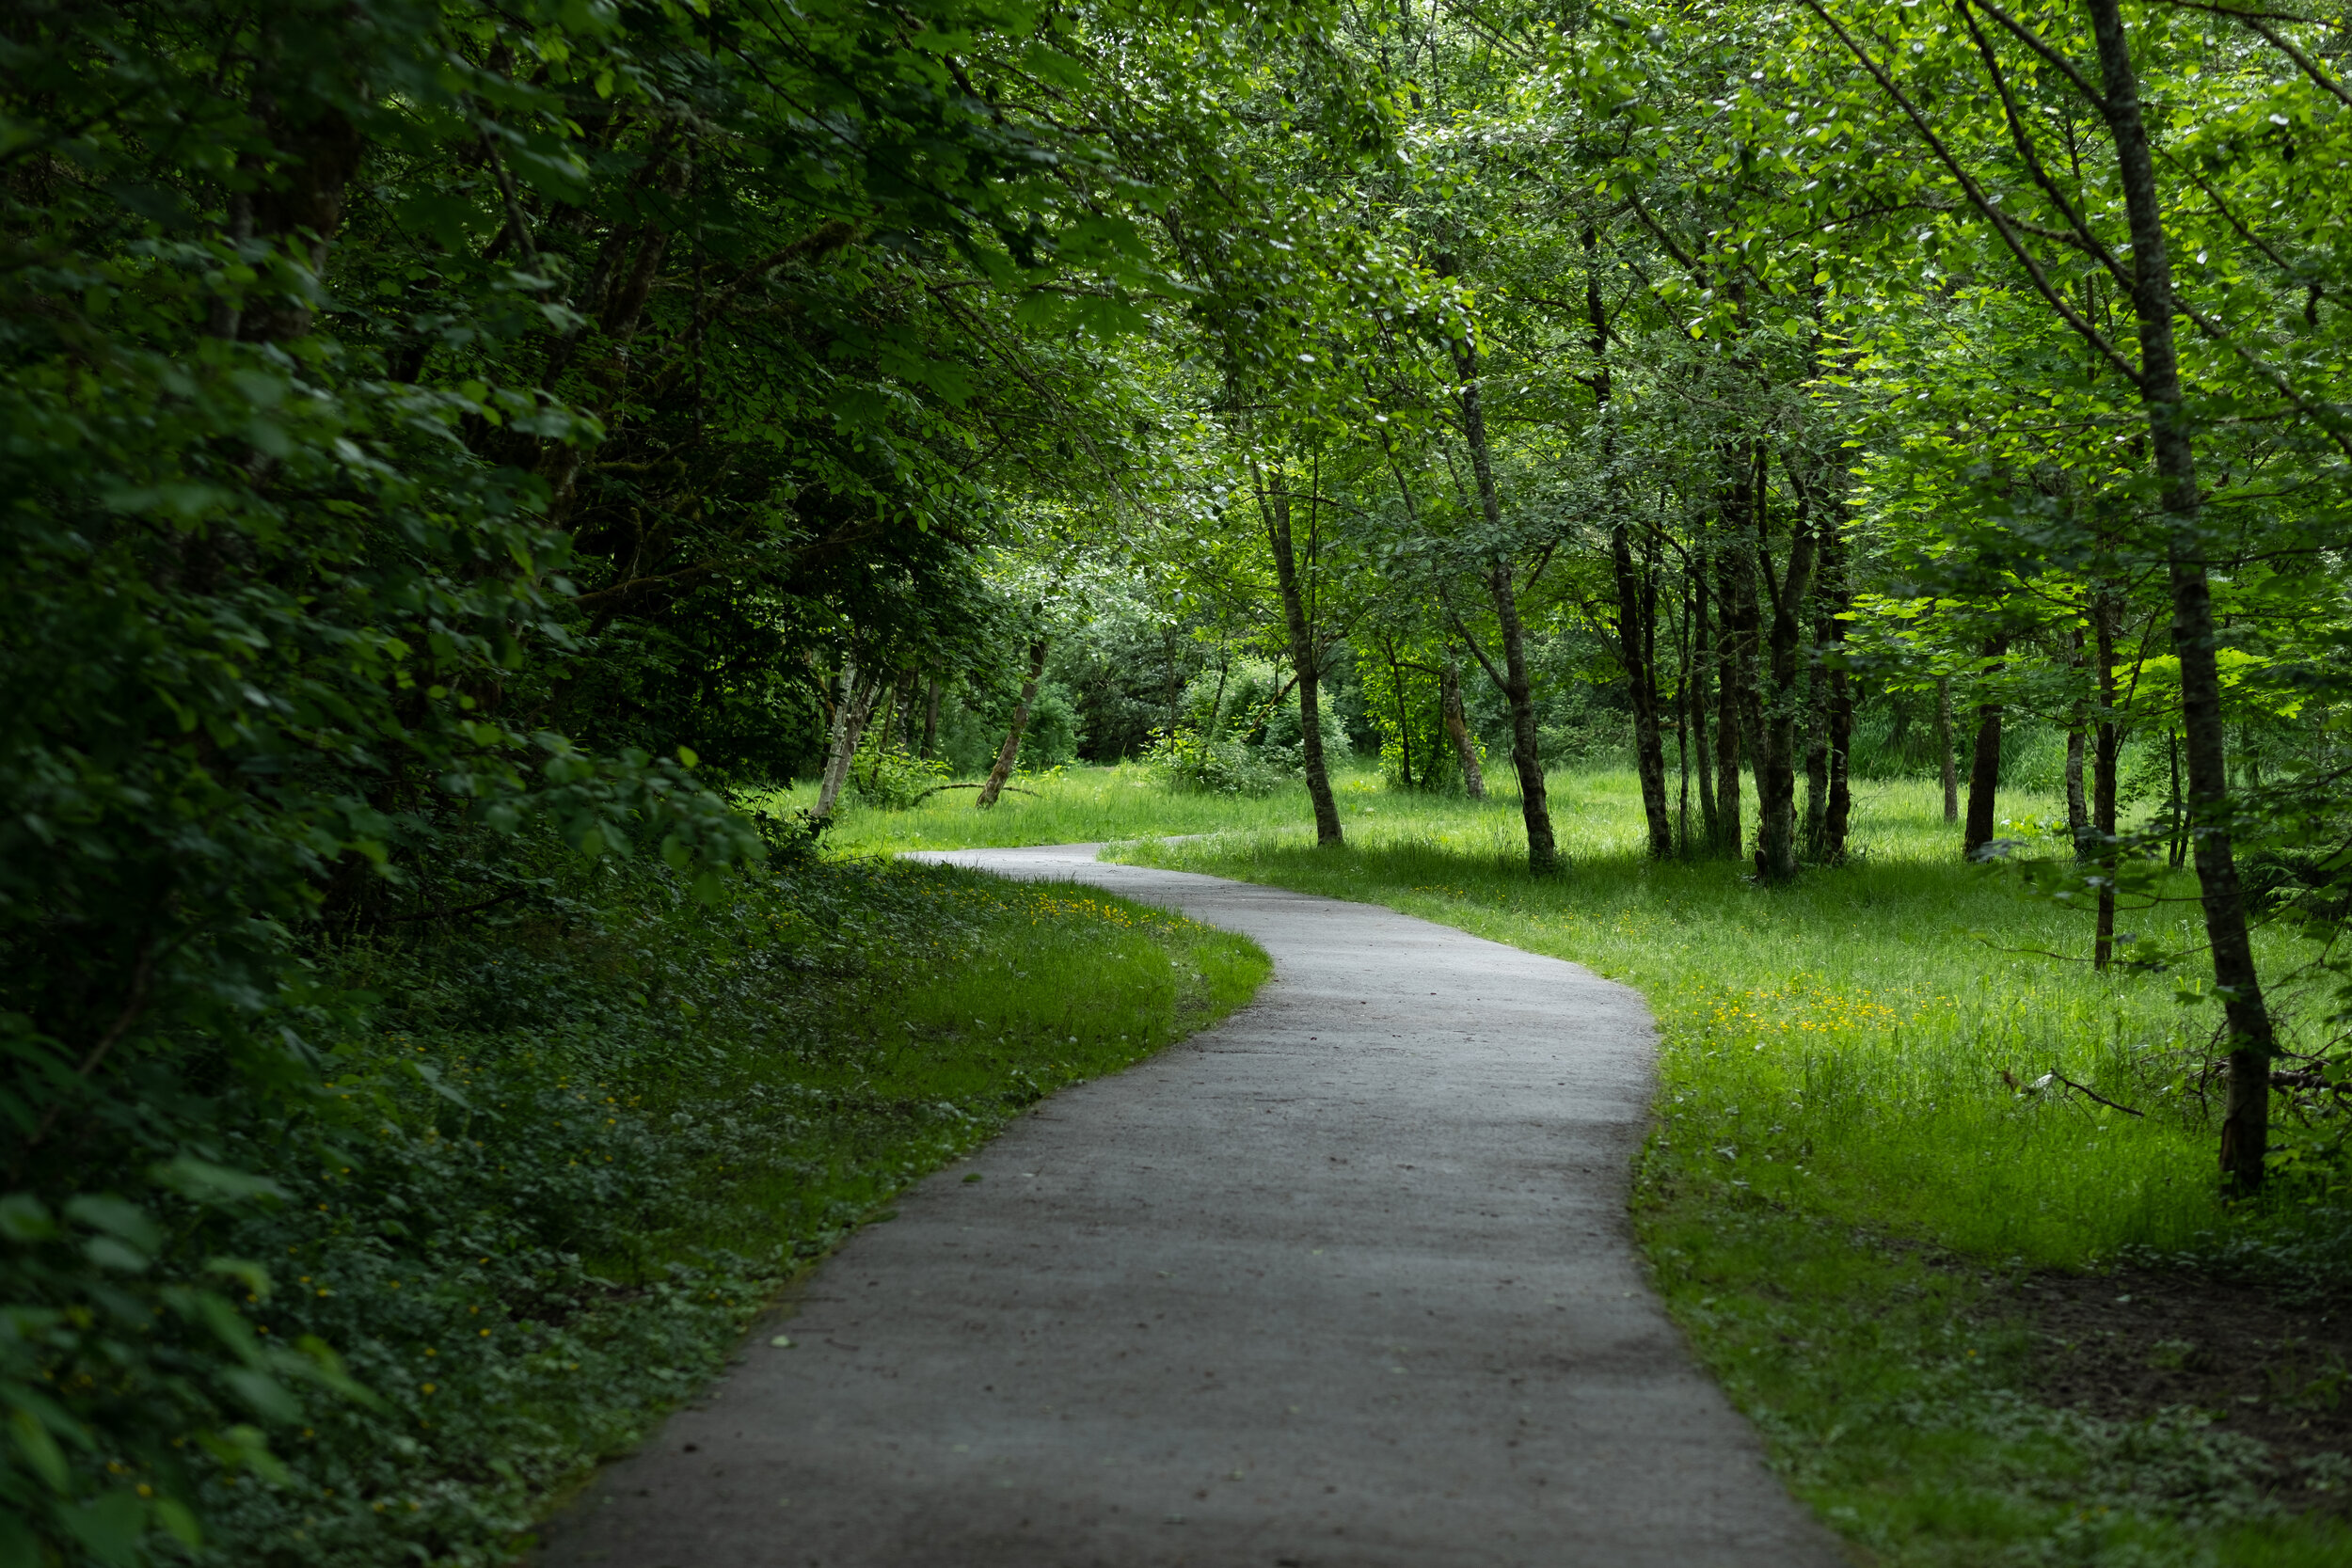 Noble_Woods_Park_Paved_Pathway_Woodland_Forest.jpg